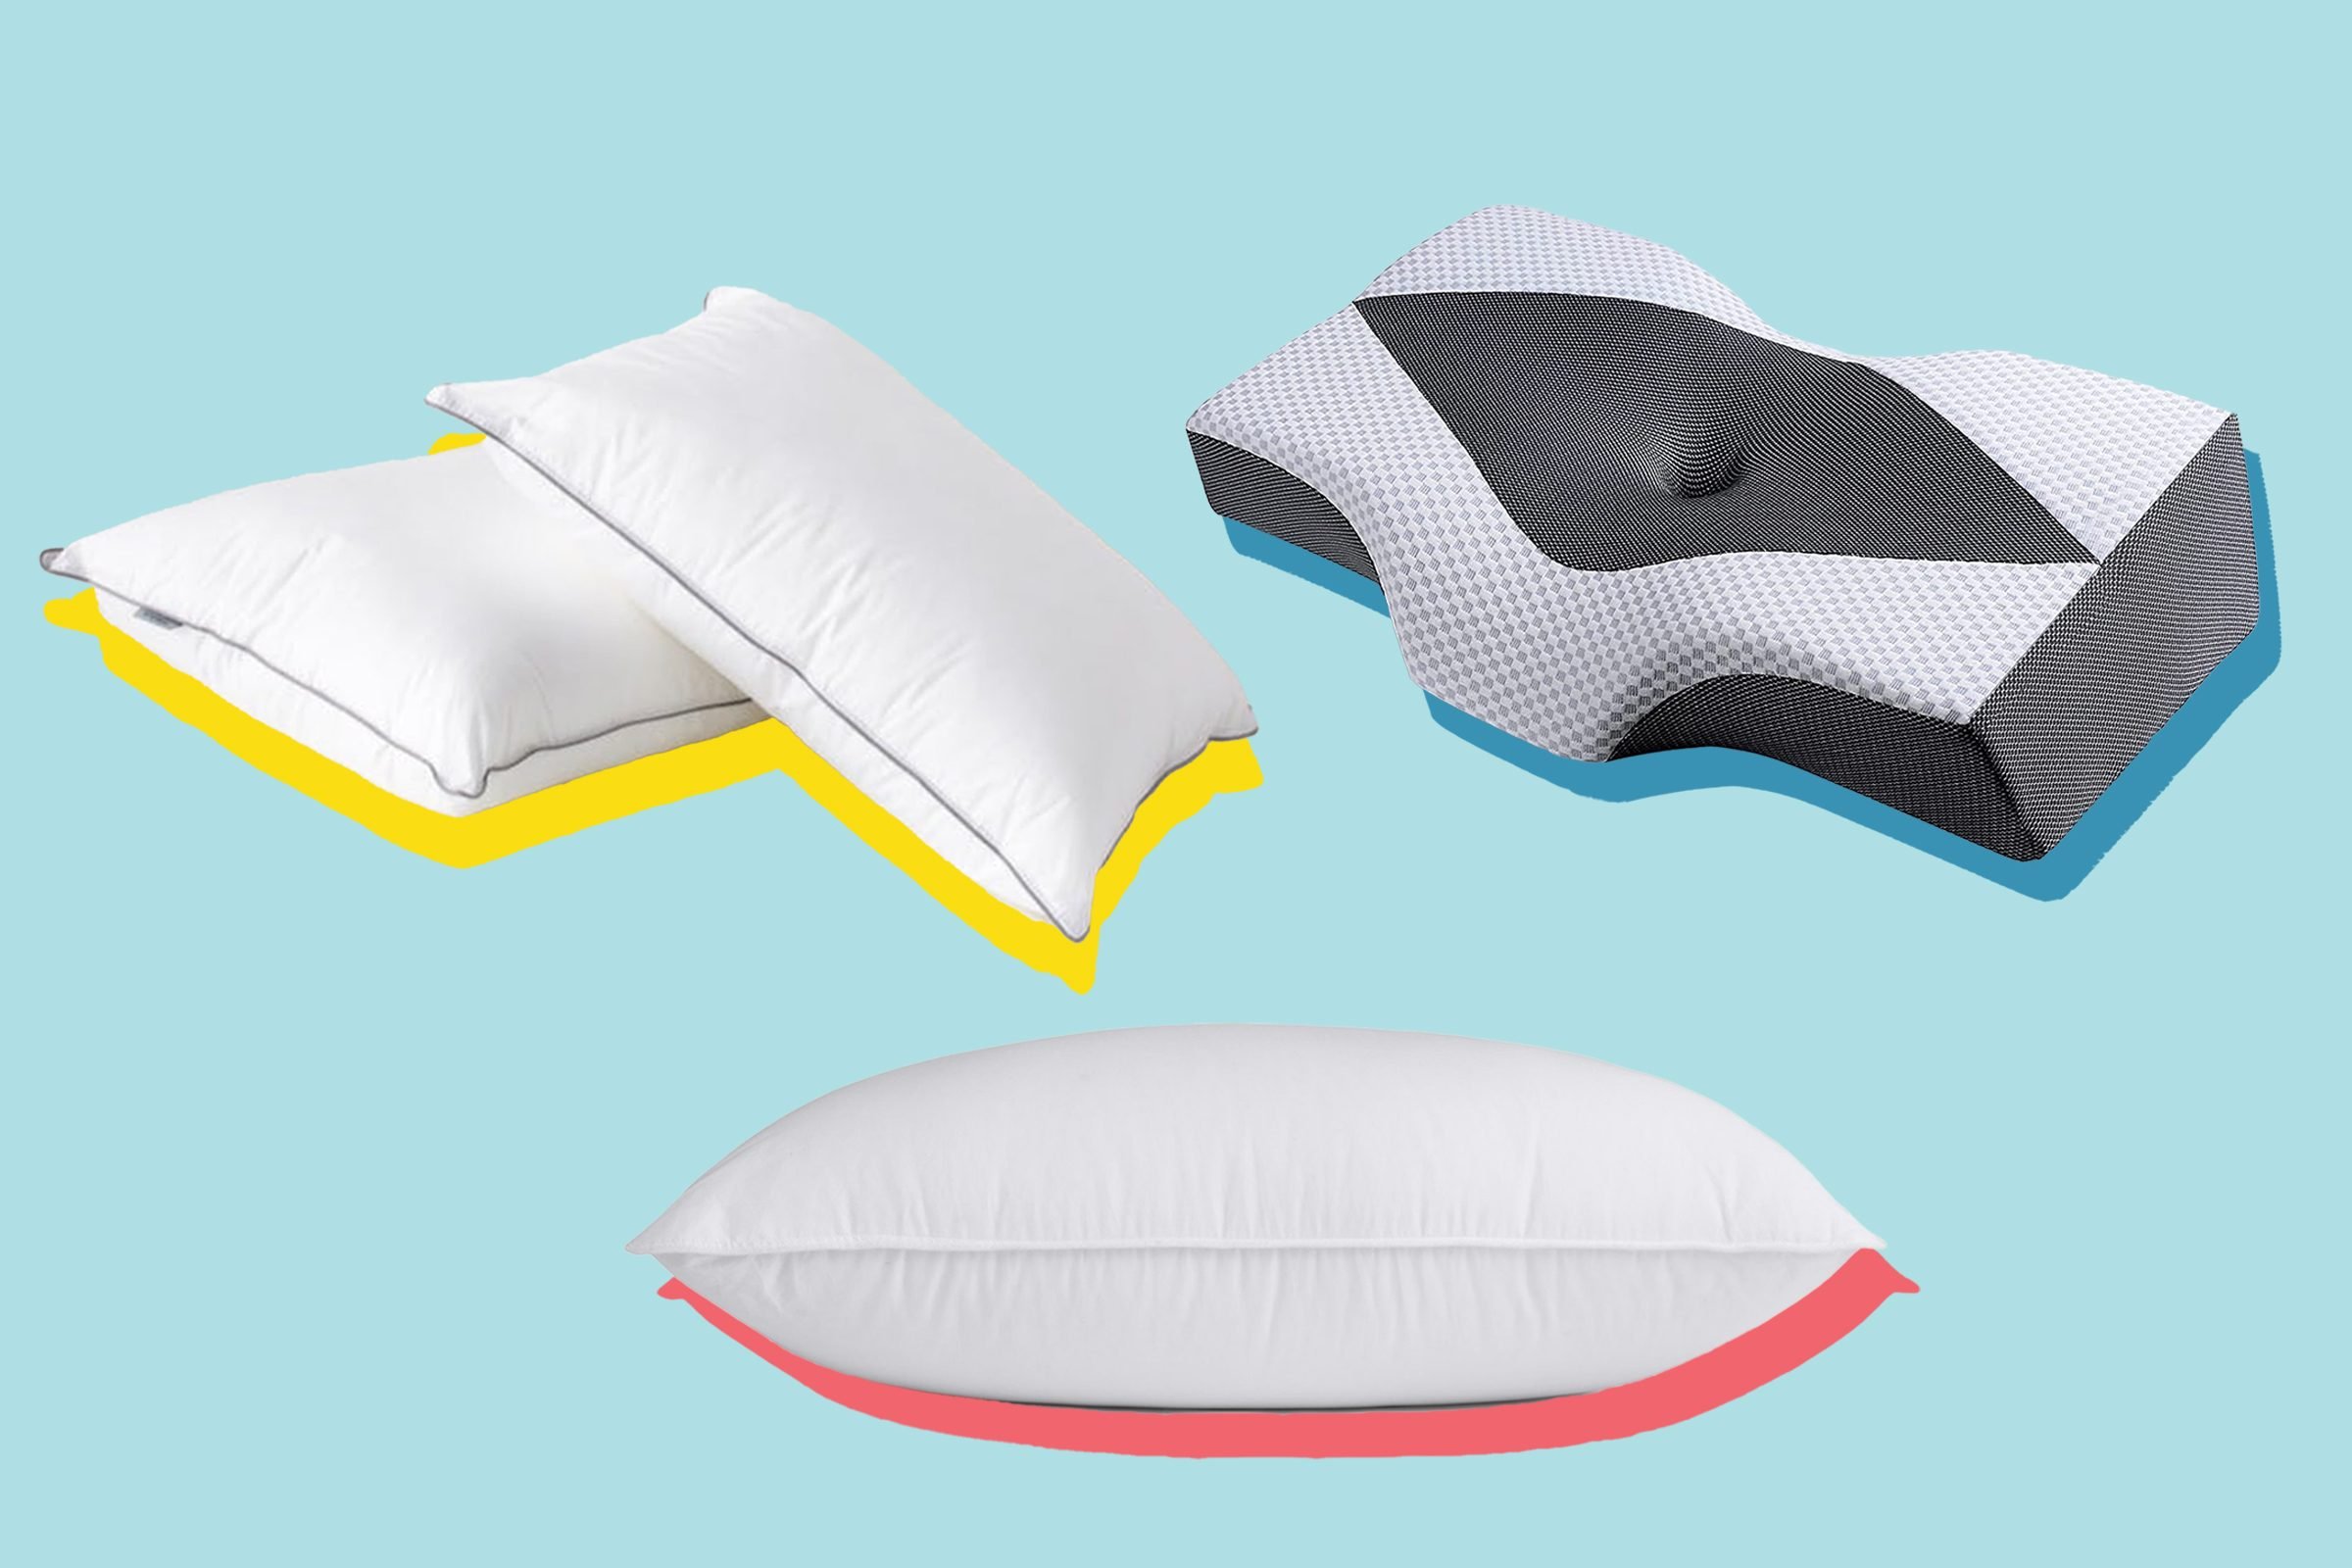 https://www.rd.com/wp-content/uploads/2021/06/The-20-Best-Pillows-for-Every-Type-of-Sleeper-Opener.jpg